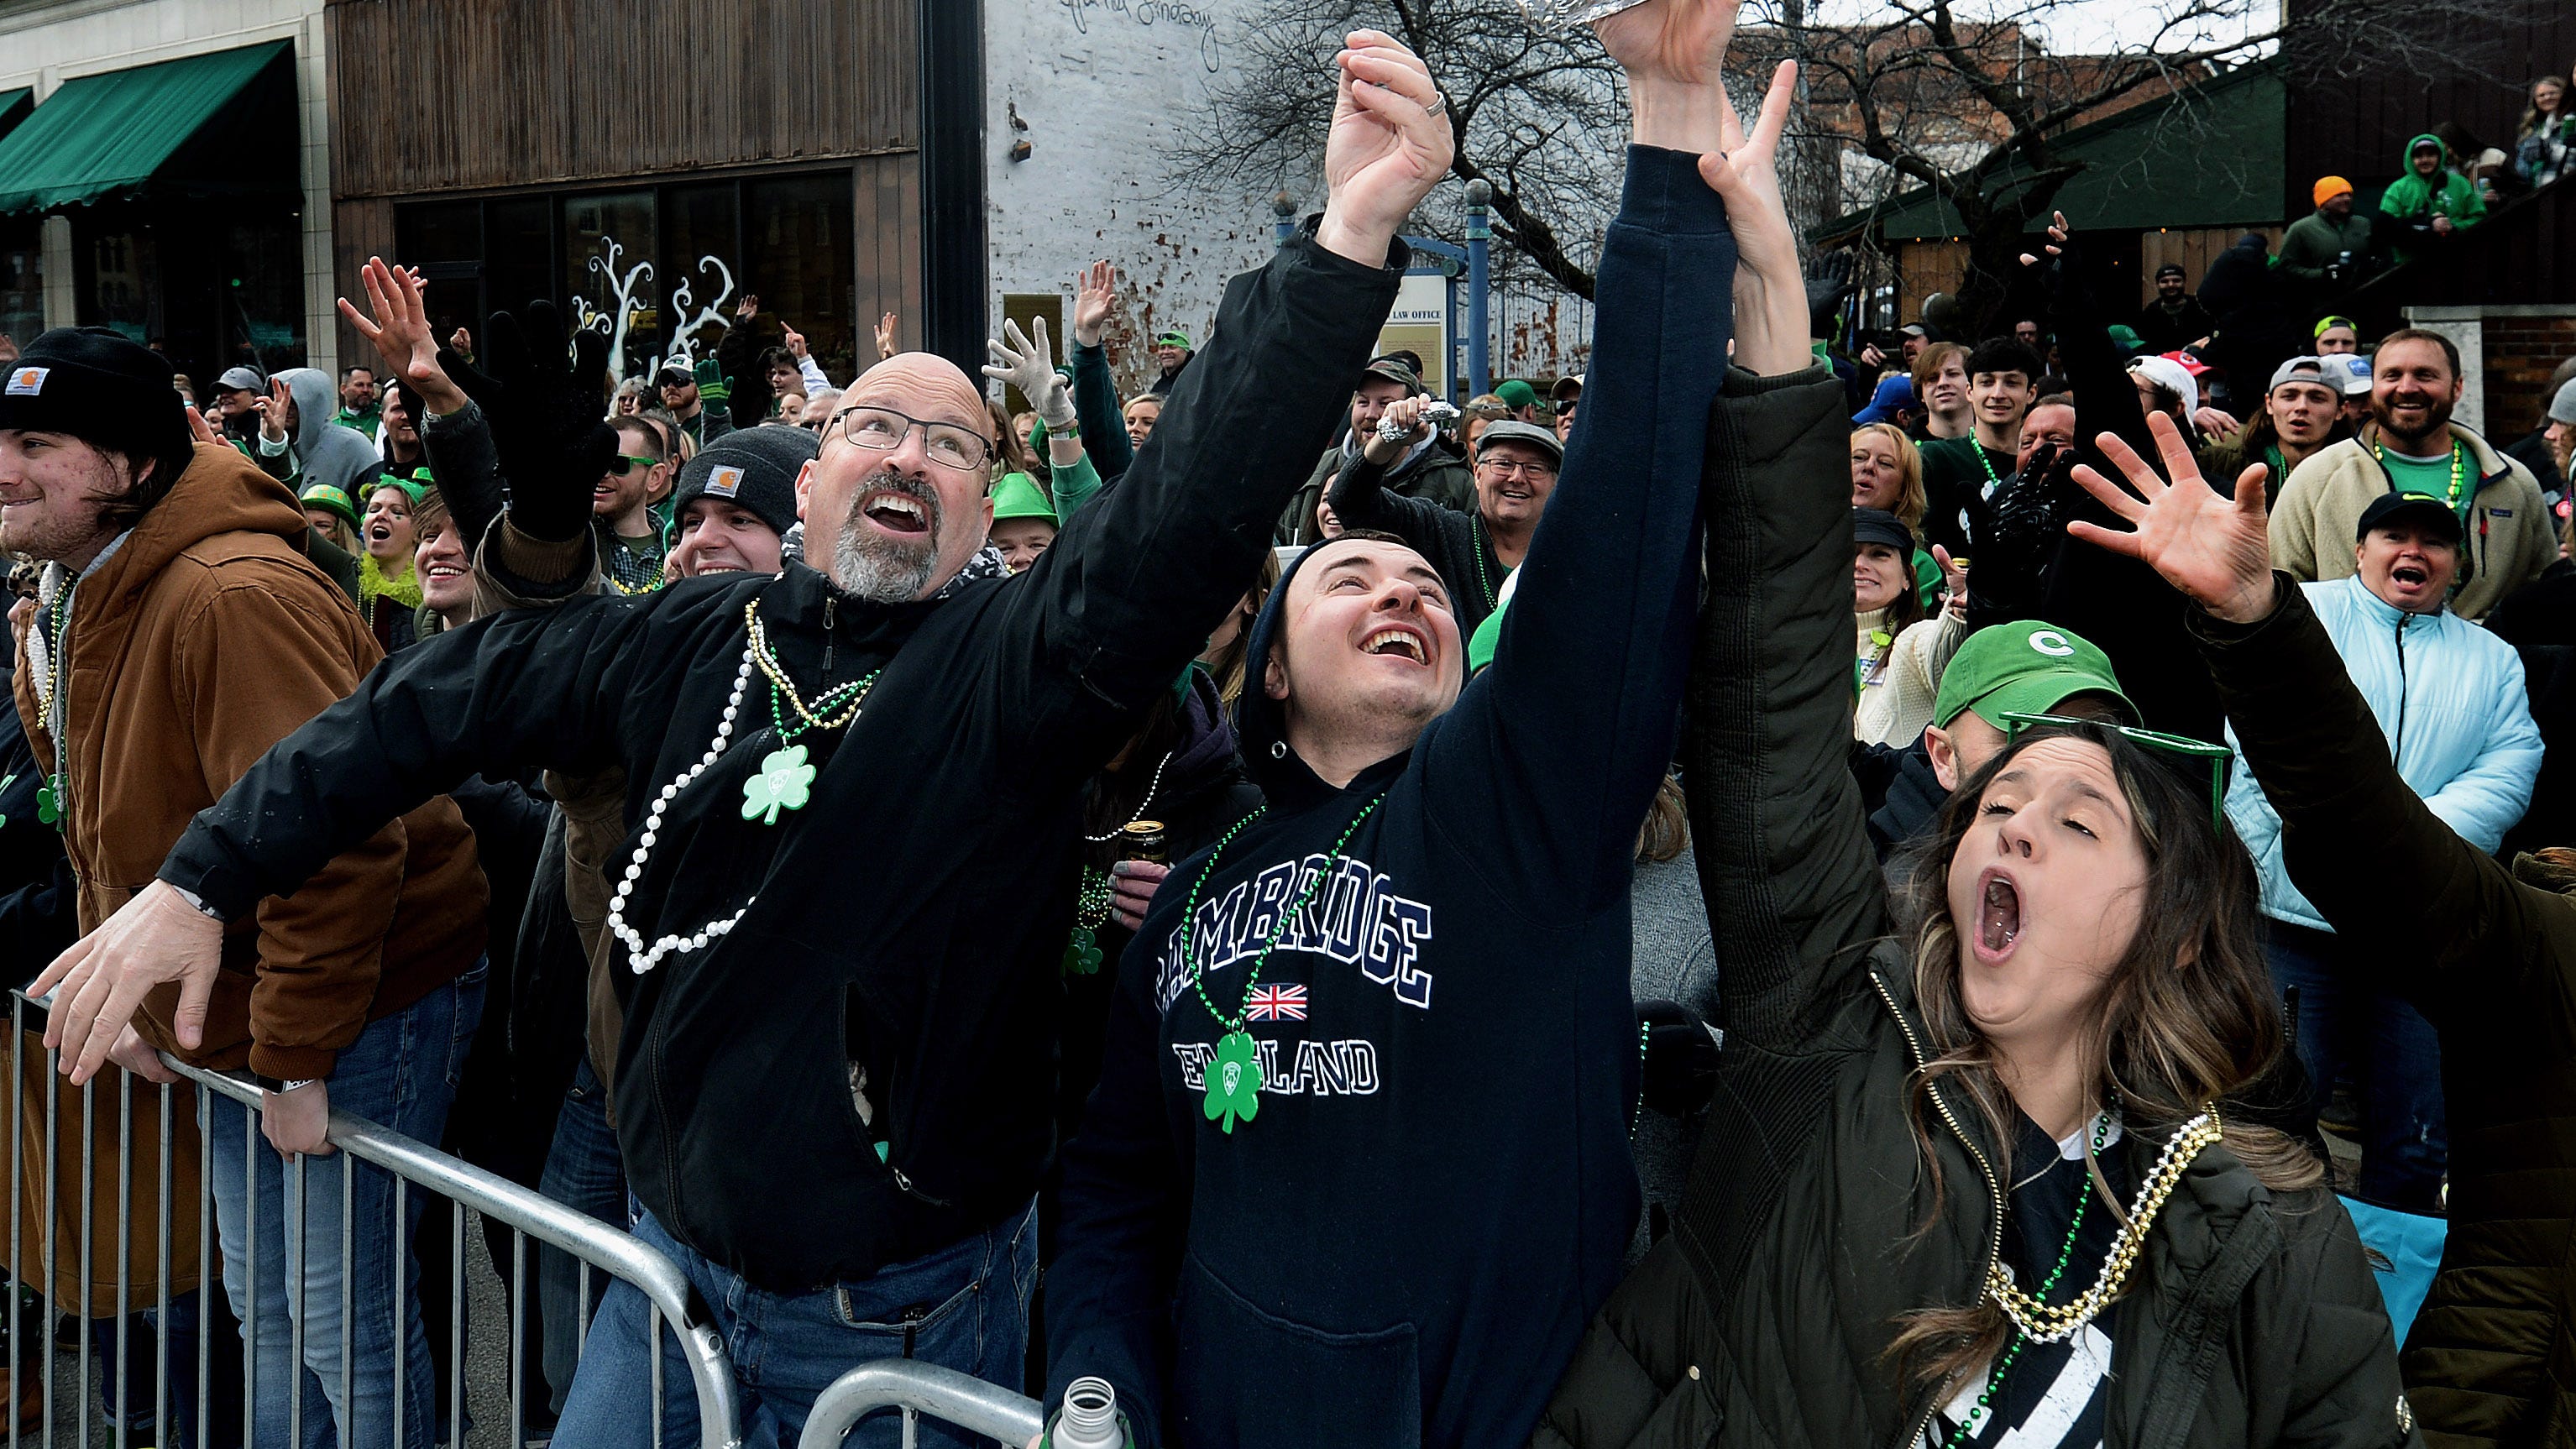 Springfield St. Patrick's Day parade with focus on family